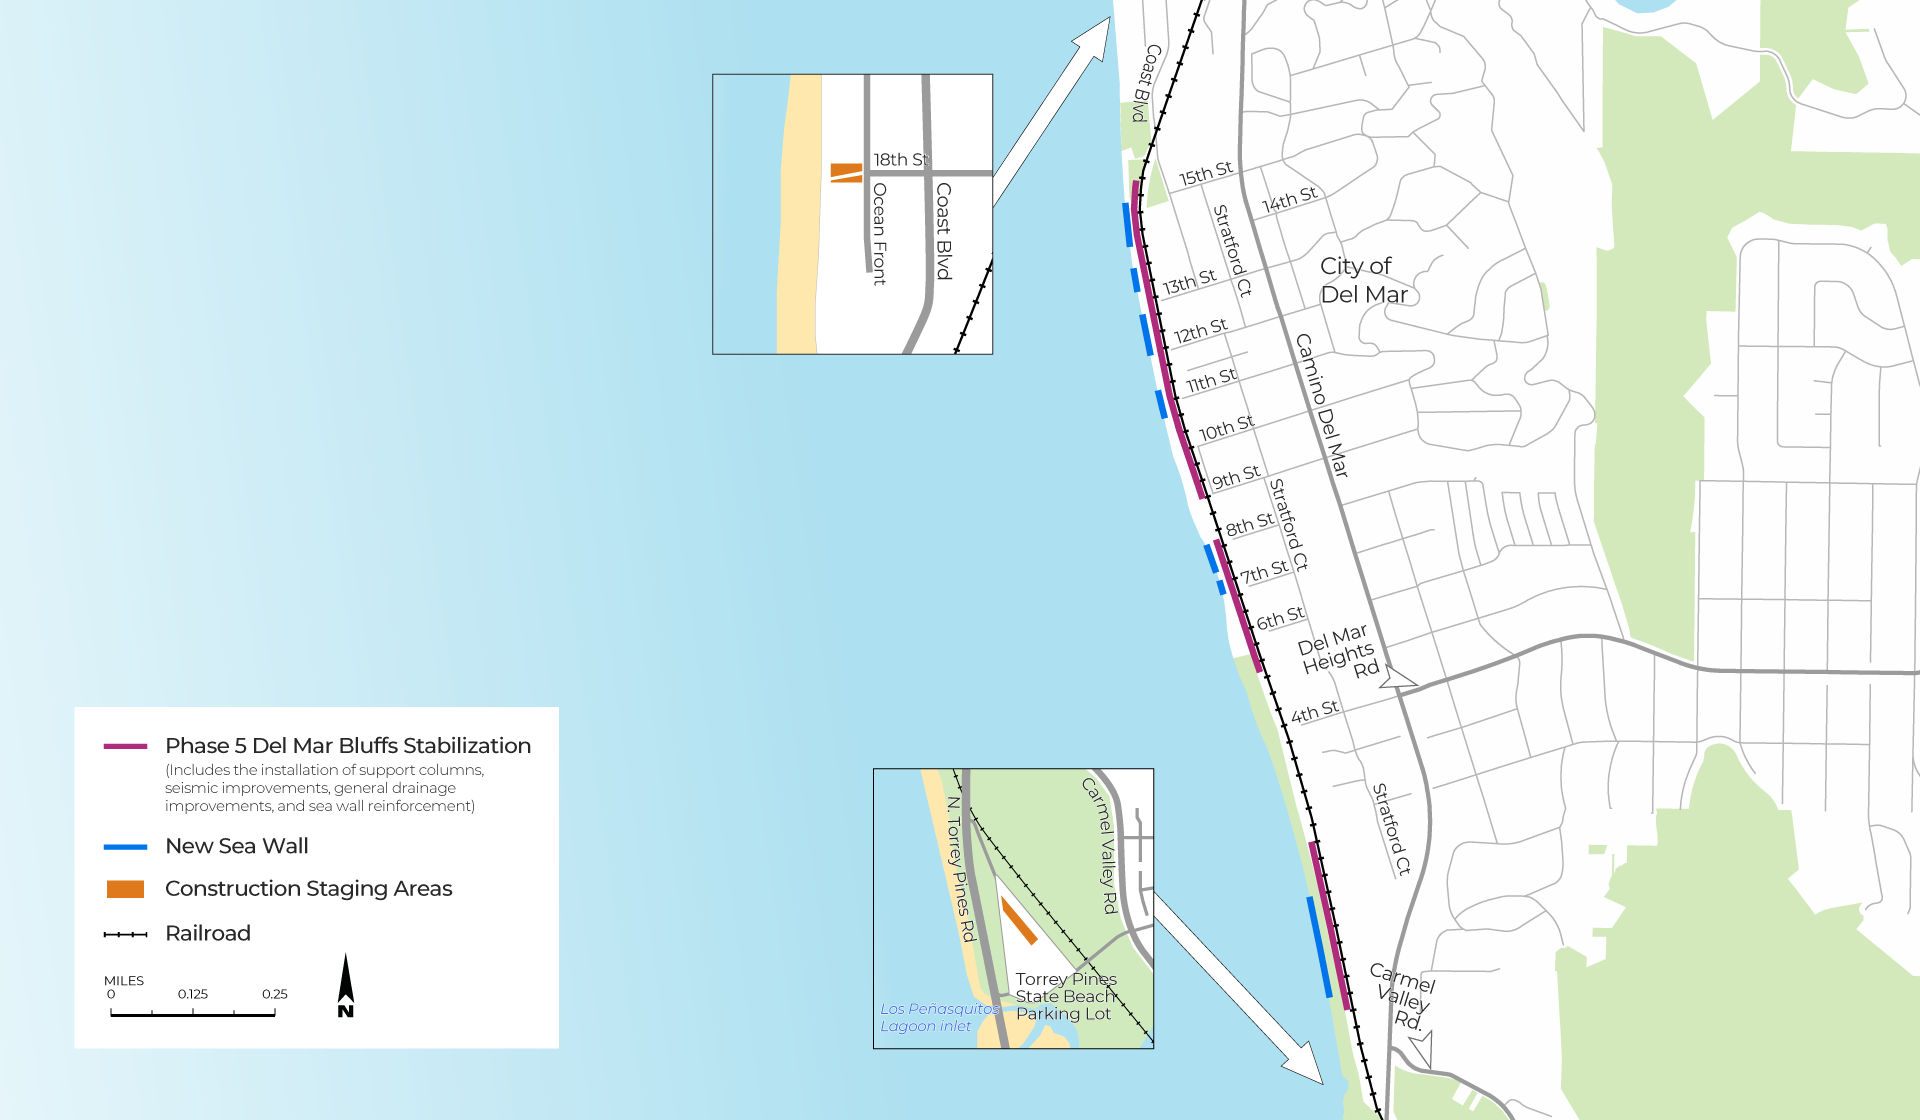 Multi-colored lines depicting the Phase 5 Del Mar Bluffs Stabilization, new sea wall, and construction staging areas spanning 1.7 miles along the Del Mar coast from Coast Boulevard to N. Torrey Pines Road bridge.